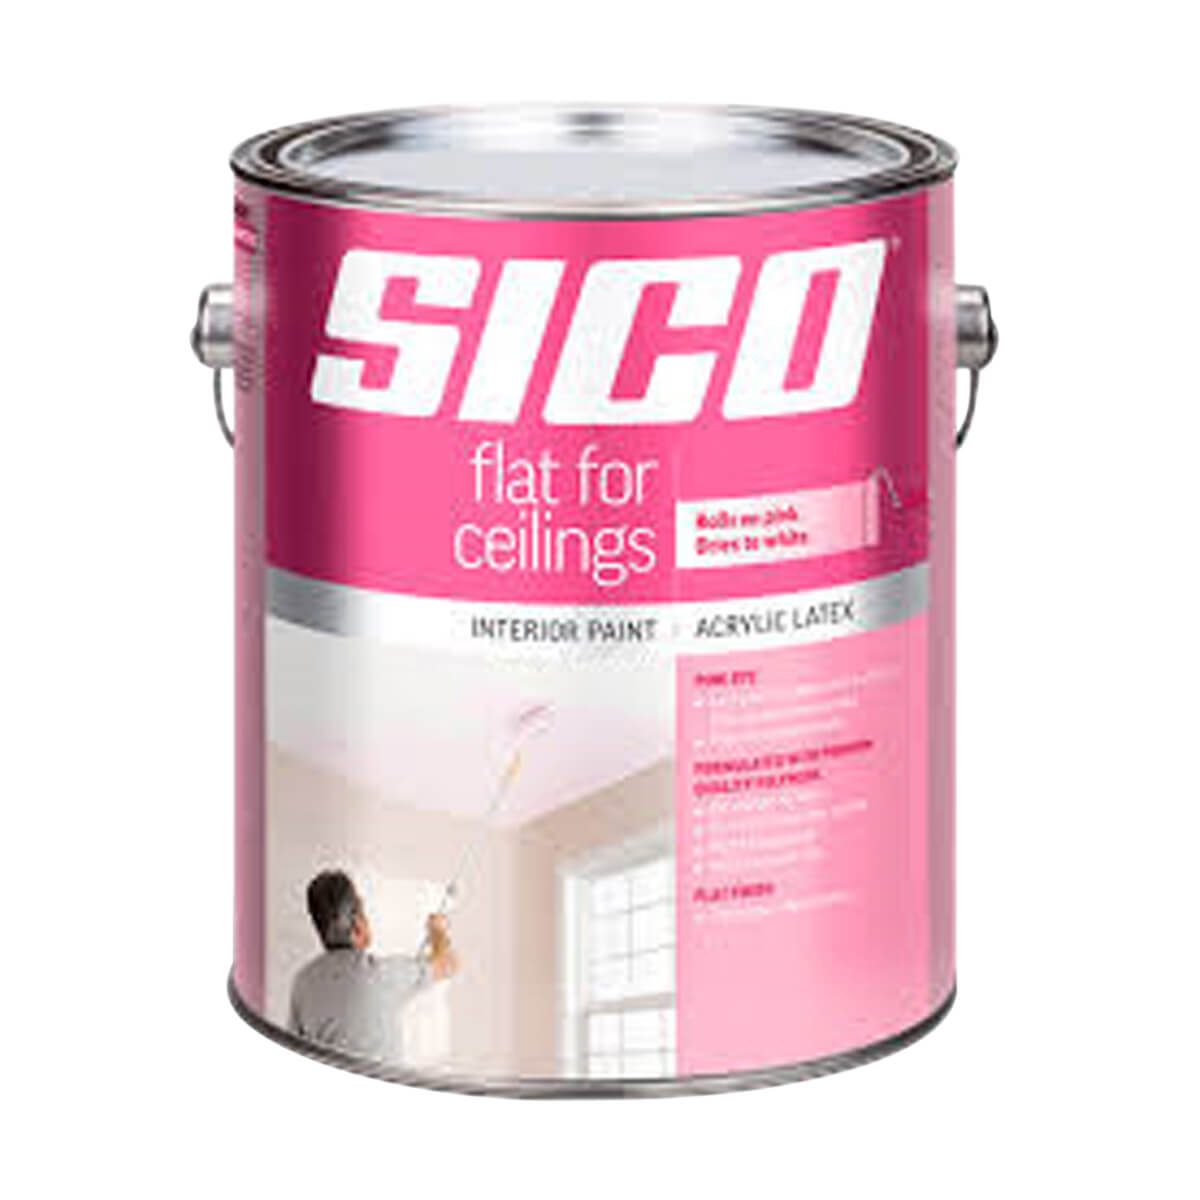 Flat for Ceilings Finish with Pink Dye Interior Latex Paint - 3.78L - White